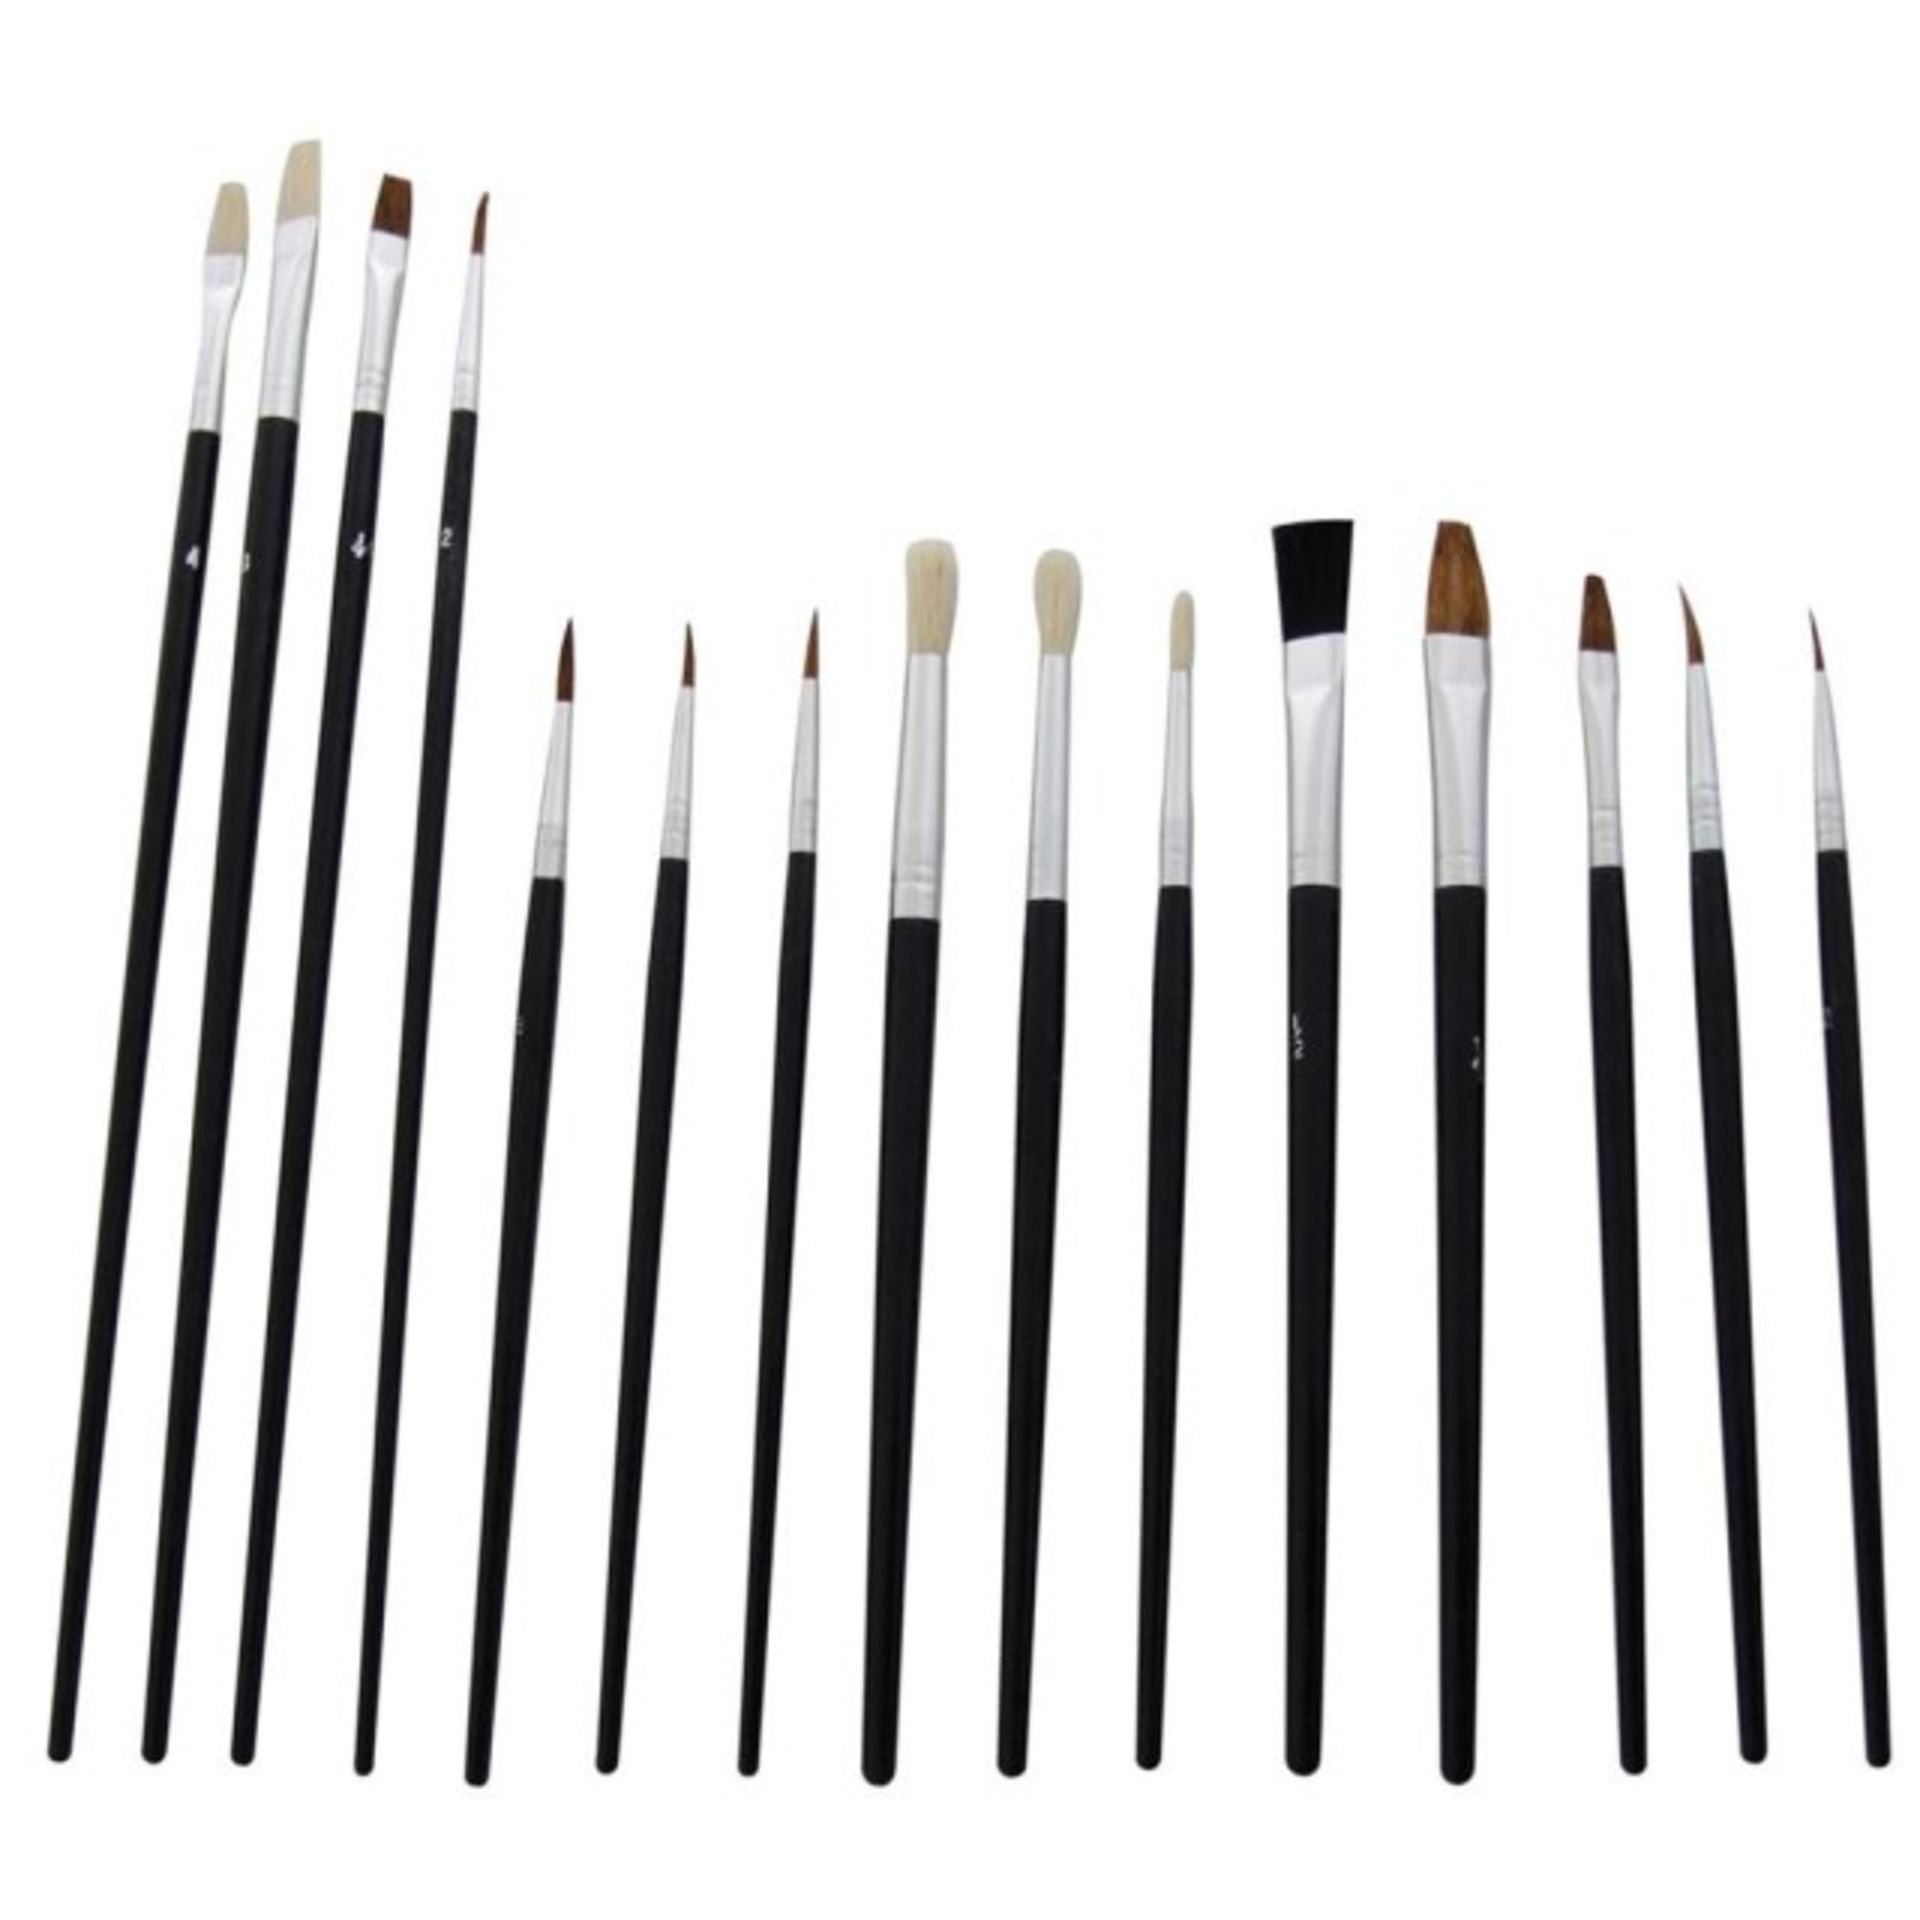 + VAT Brand New 15pc Paint Brush Set Being Suitable For Watercolours And Oils/Model Making Etc